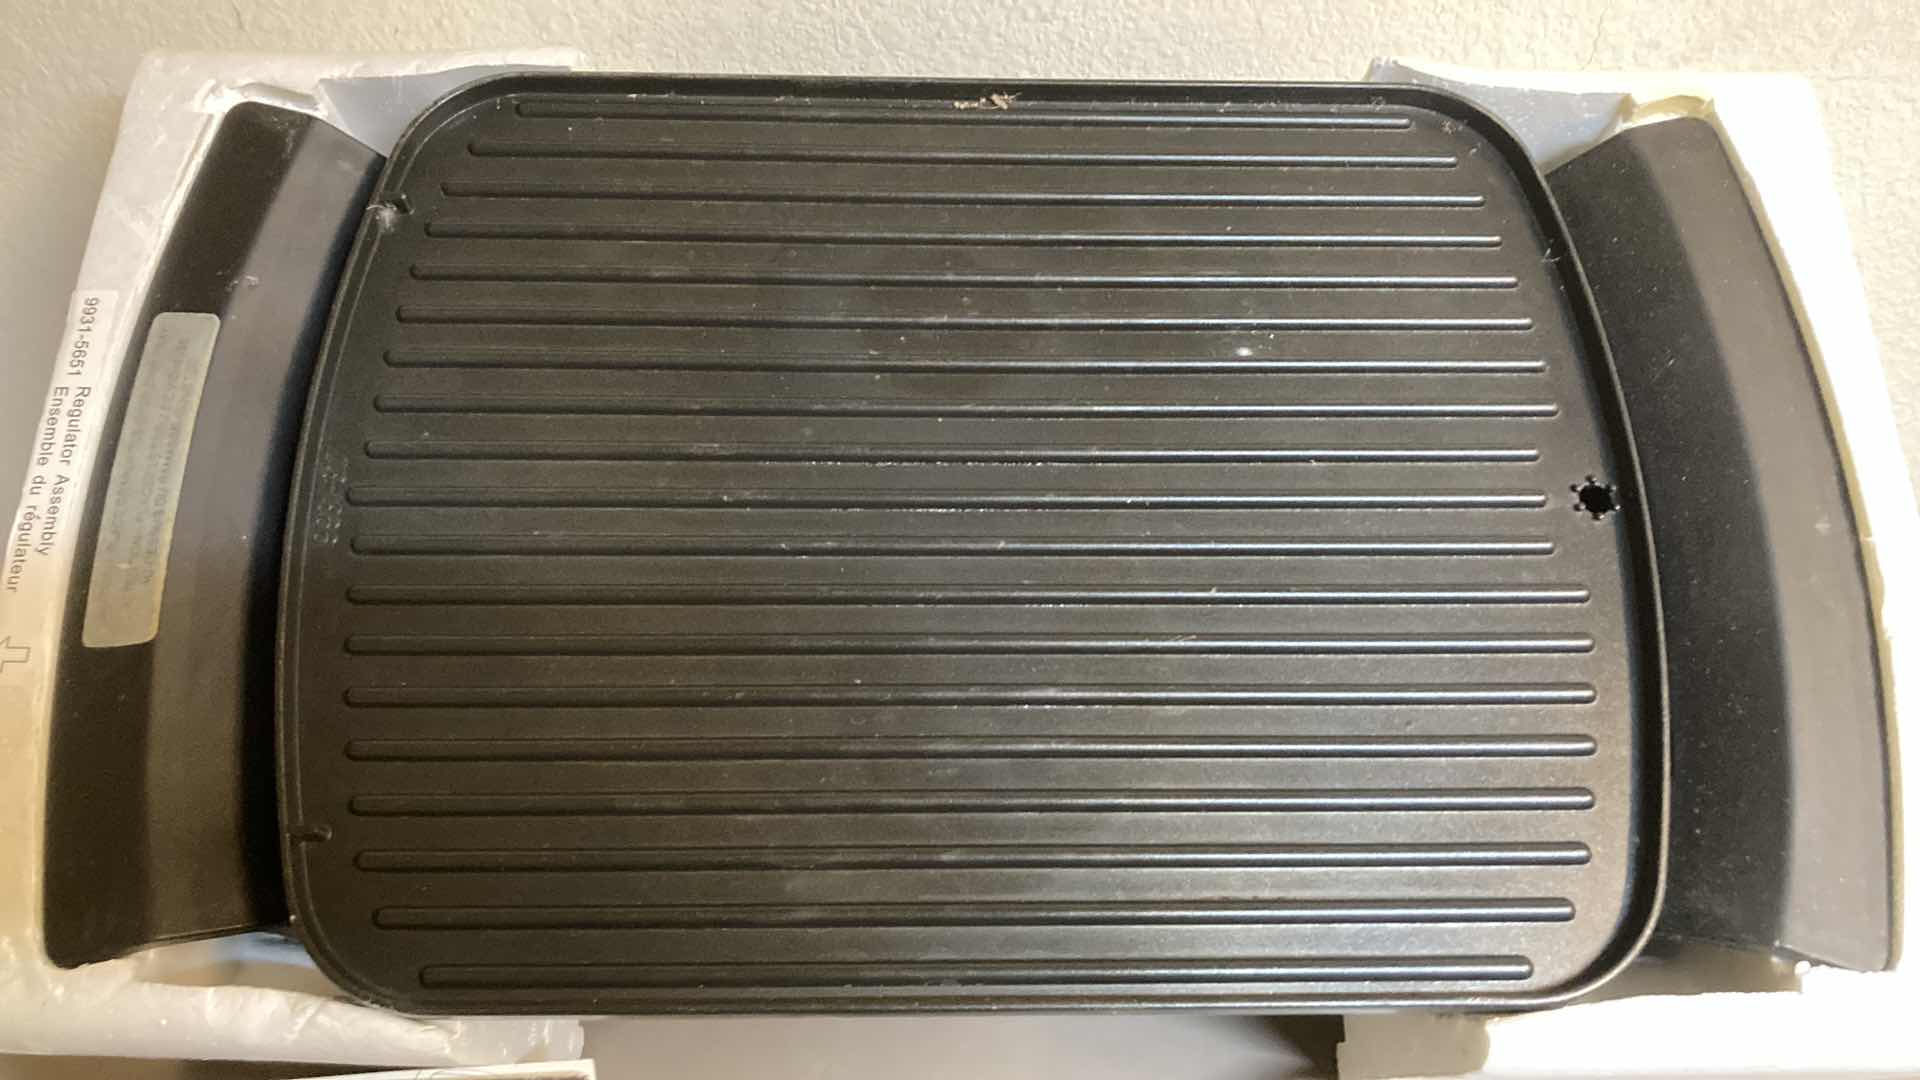 Photo 6 of COLEMAN PROPANE GRILLIN GRIDDLE  MODEL 9931750